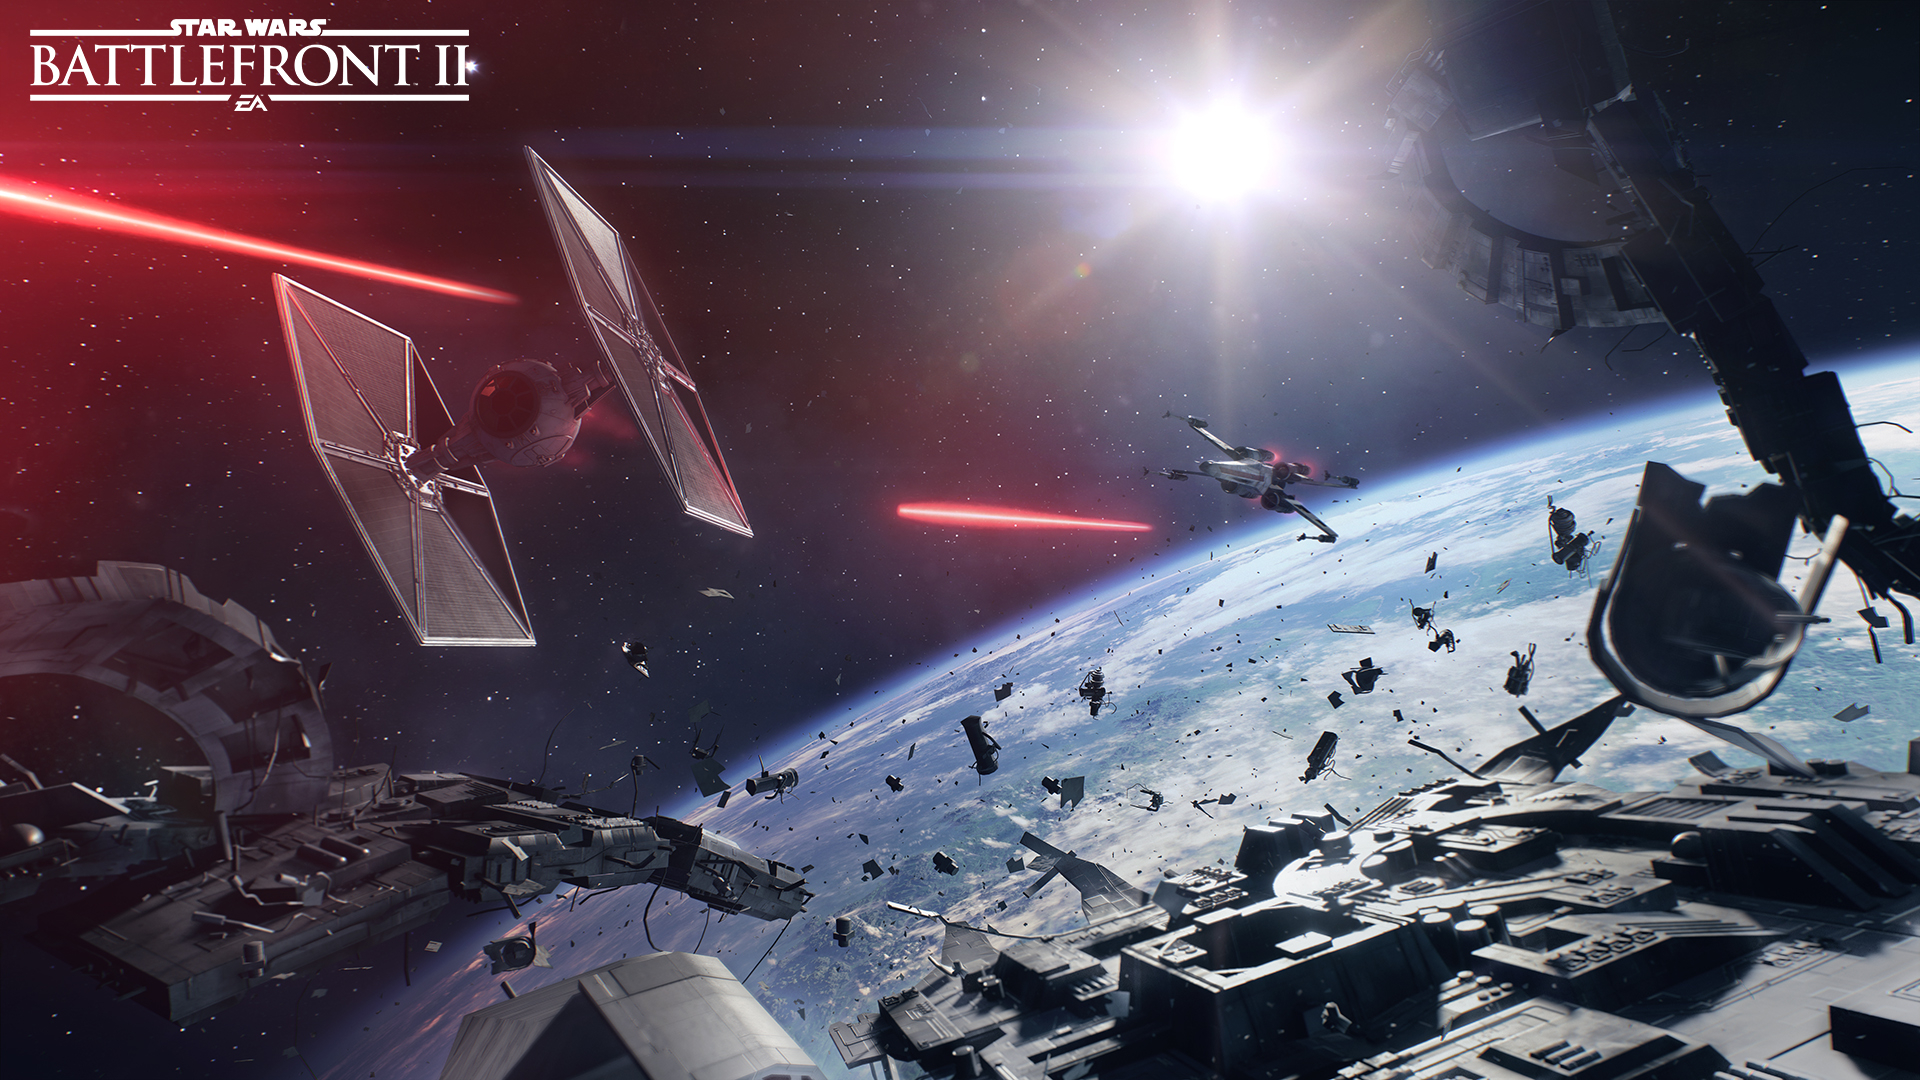 1920x1080 240+ Star Wars Battlefront II (2017) HD Wallpapers and Backgrounds